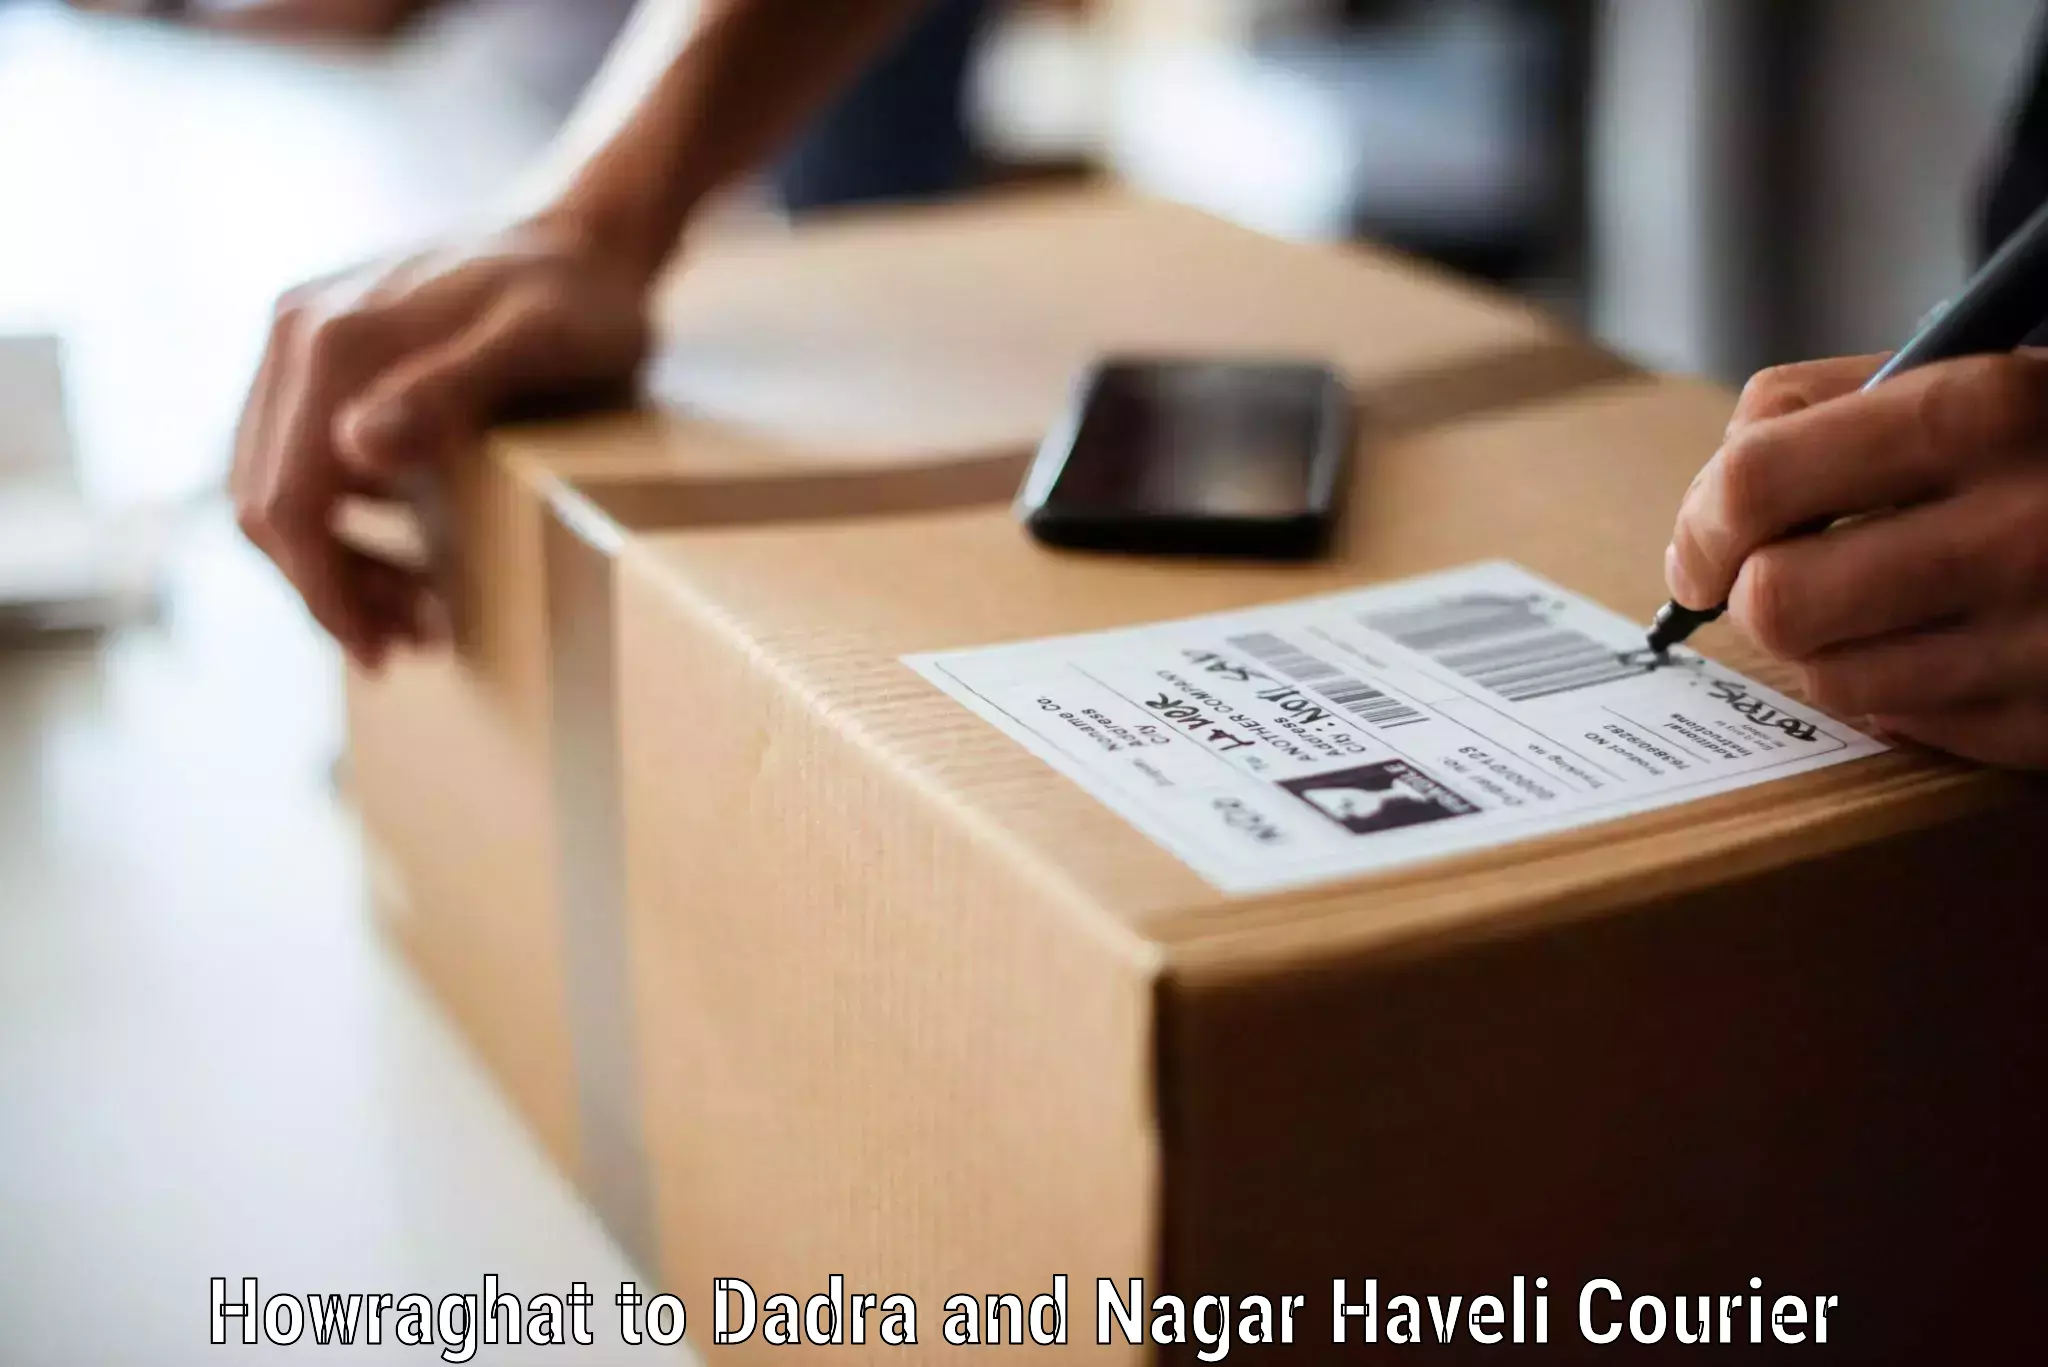 Household moving experts Howraghat to Dadra and Nagar Haveli